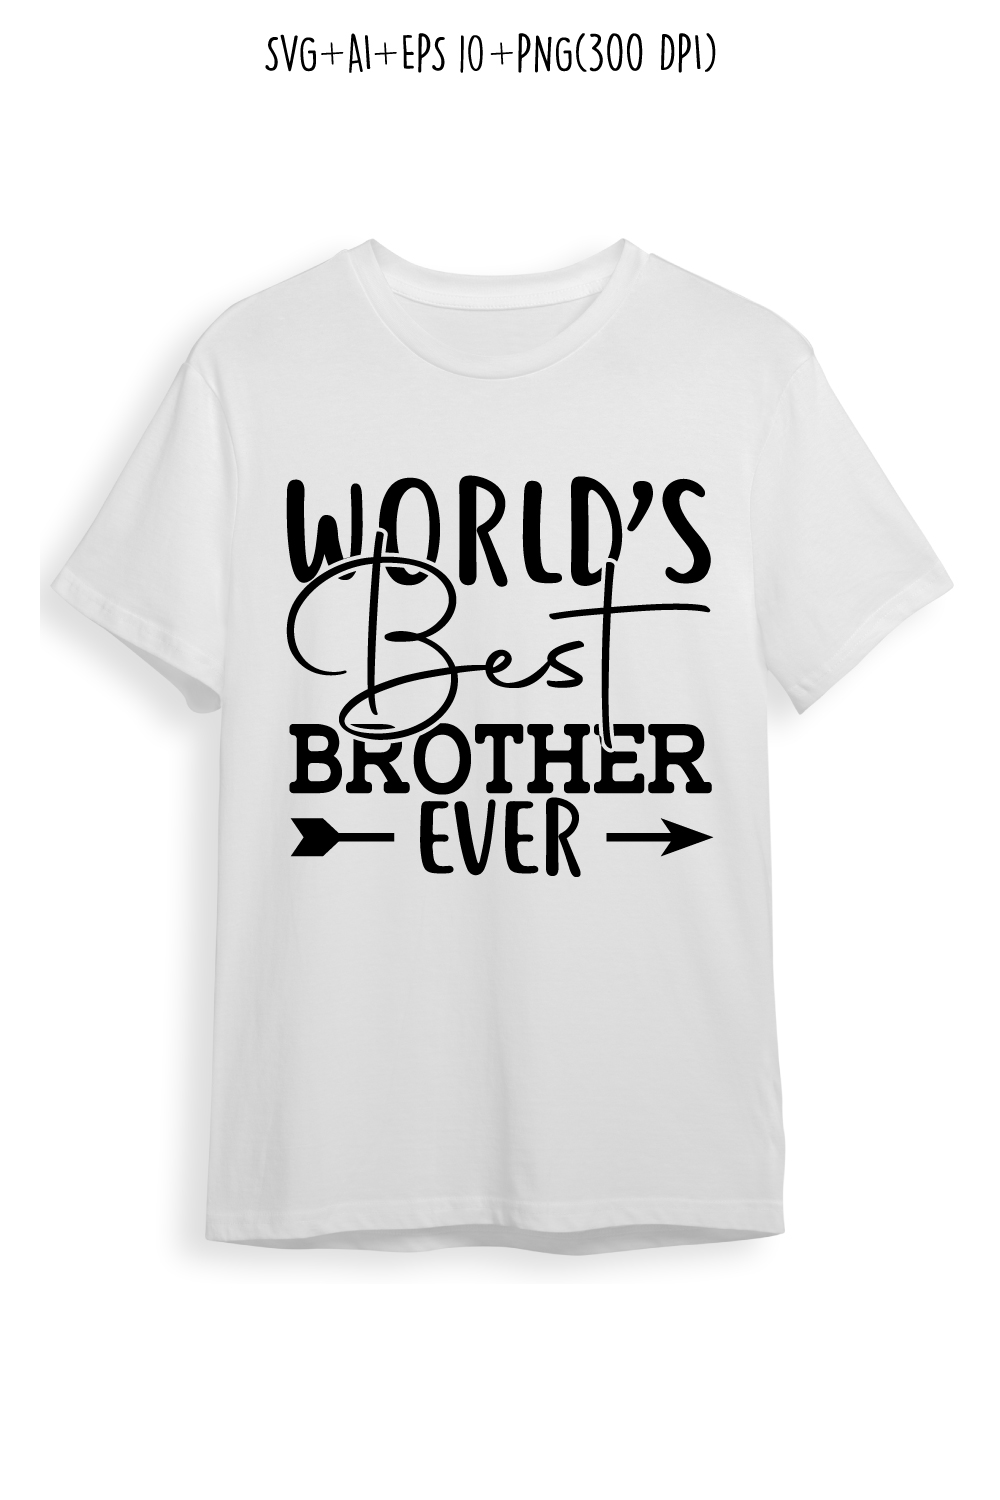 world's best brother ever SVG design for t-shirts, cards, frame artwork, phone cases, bags, mugs, stickers, tumblers, print, etc pinterest preview image.